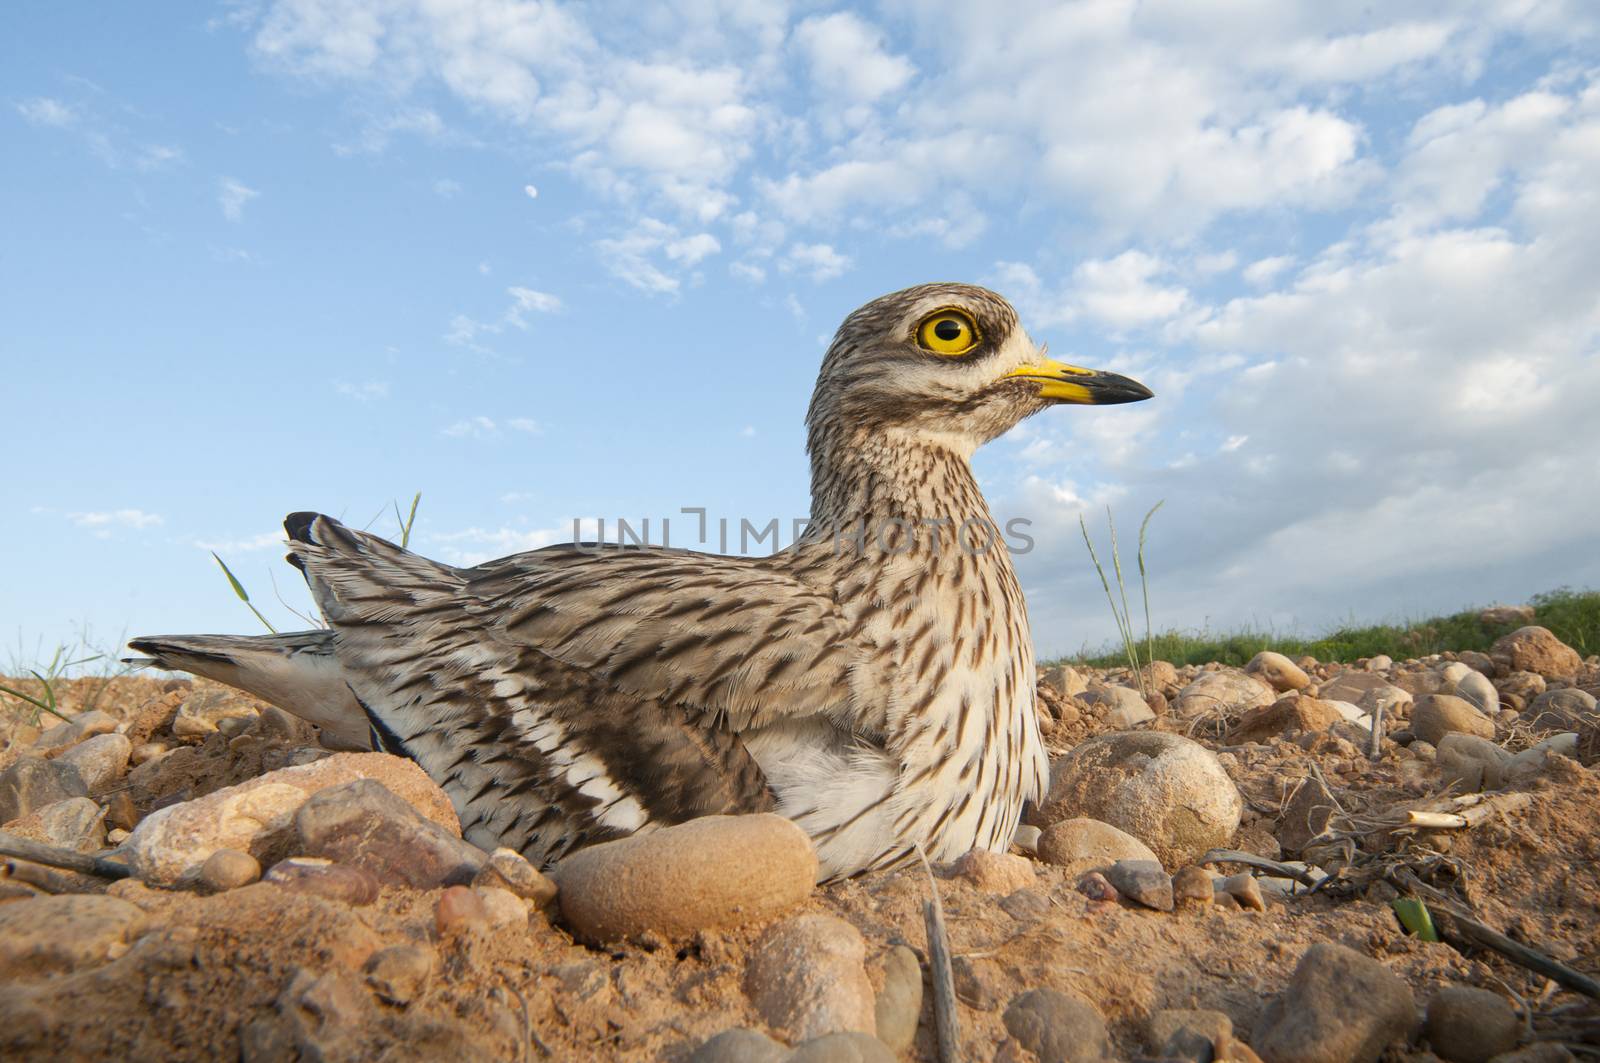 Burhinus oedicnemus (Eurasian thick knee, Eurasian Stone-curlew, Stone Curlew) in its nest, with wide angle